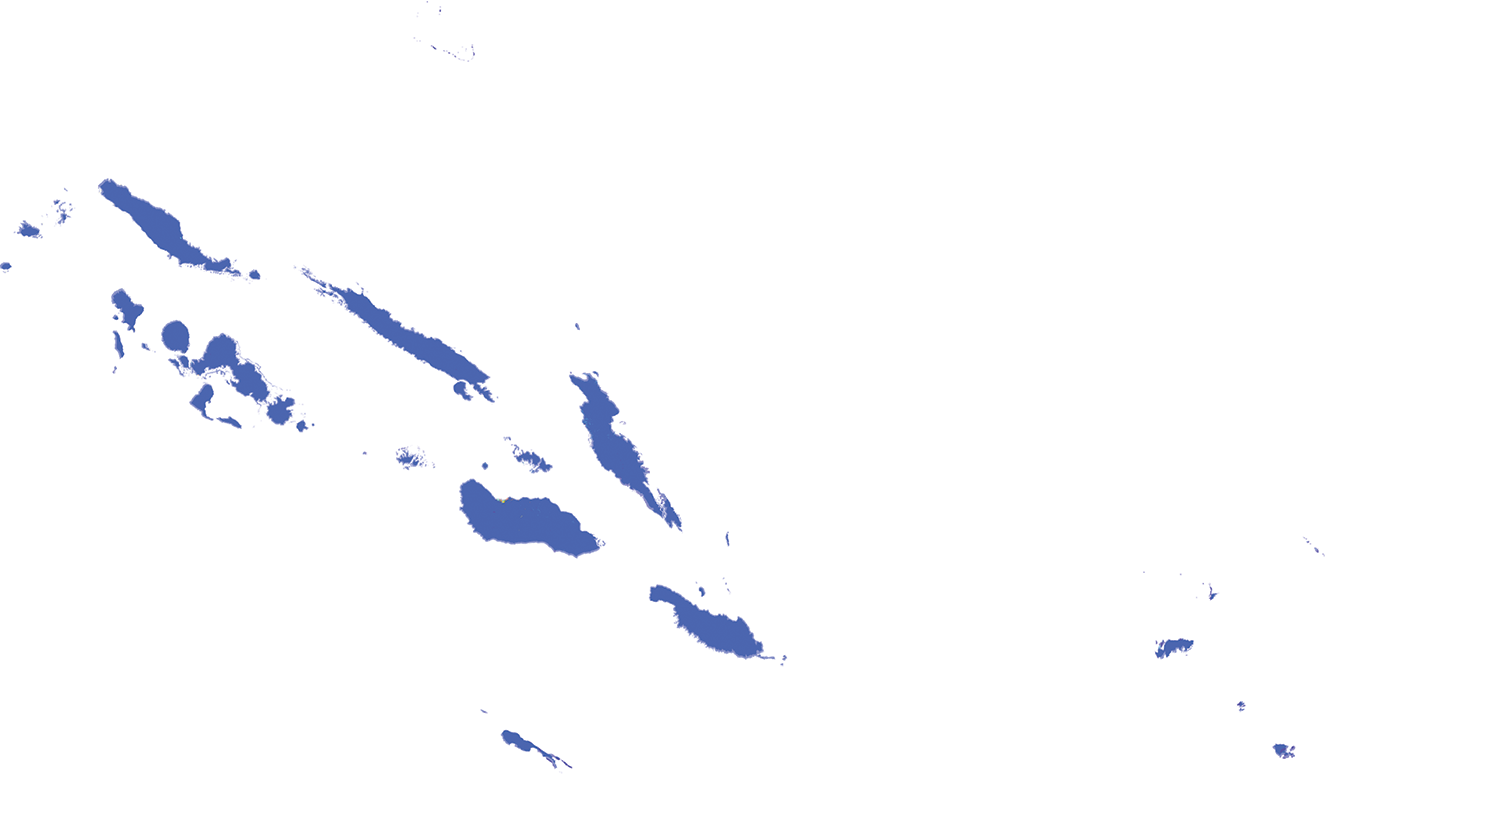 Solomon Islands - Number and distribution of pregnancies (2012)